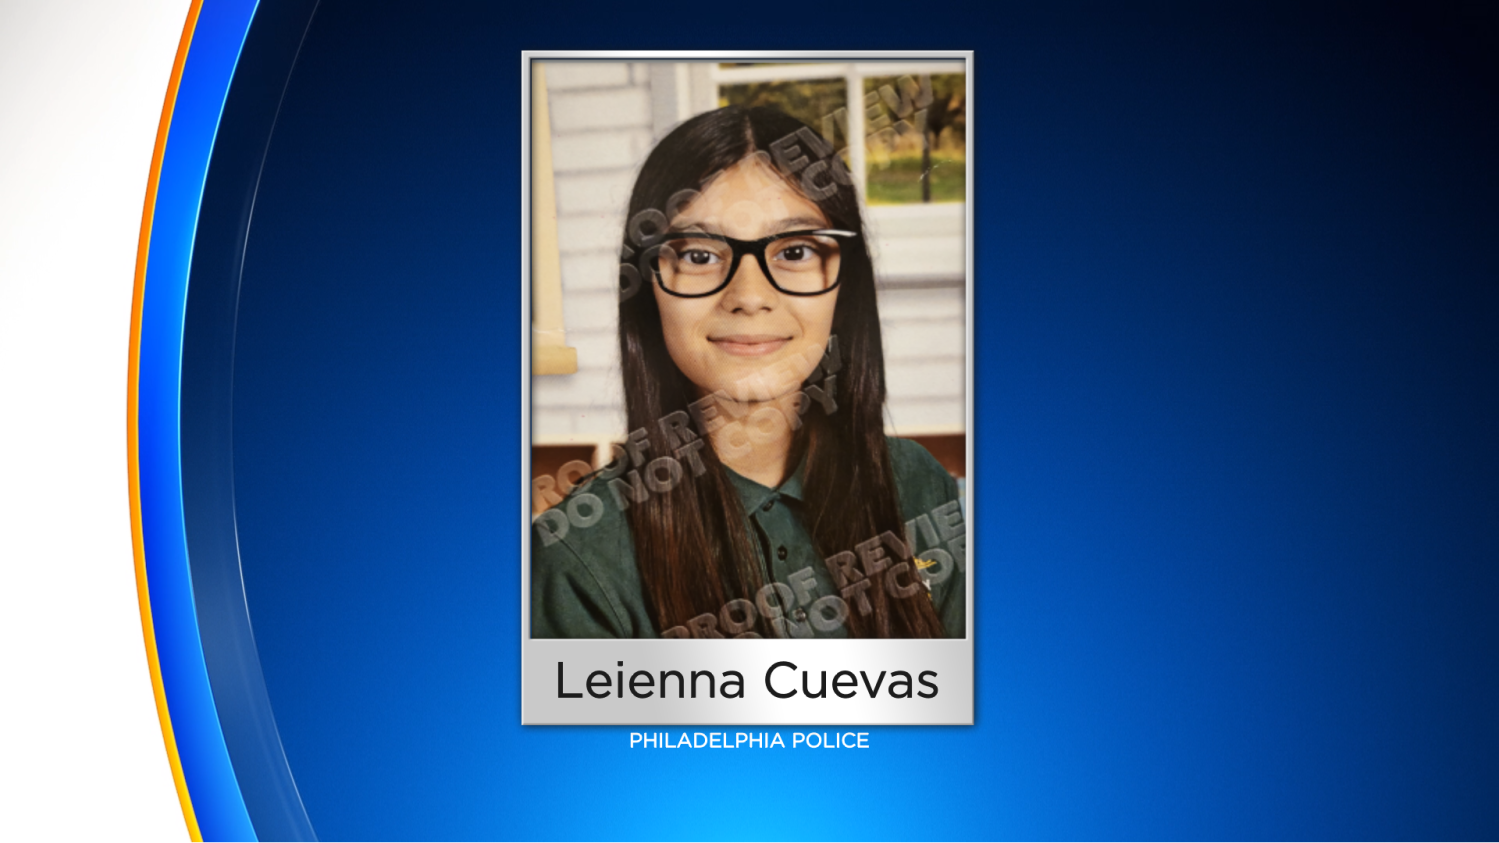 Missing girl Leienna Cuevas, 13, reunited with family